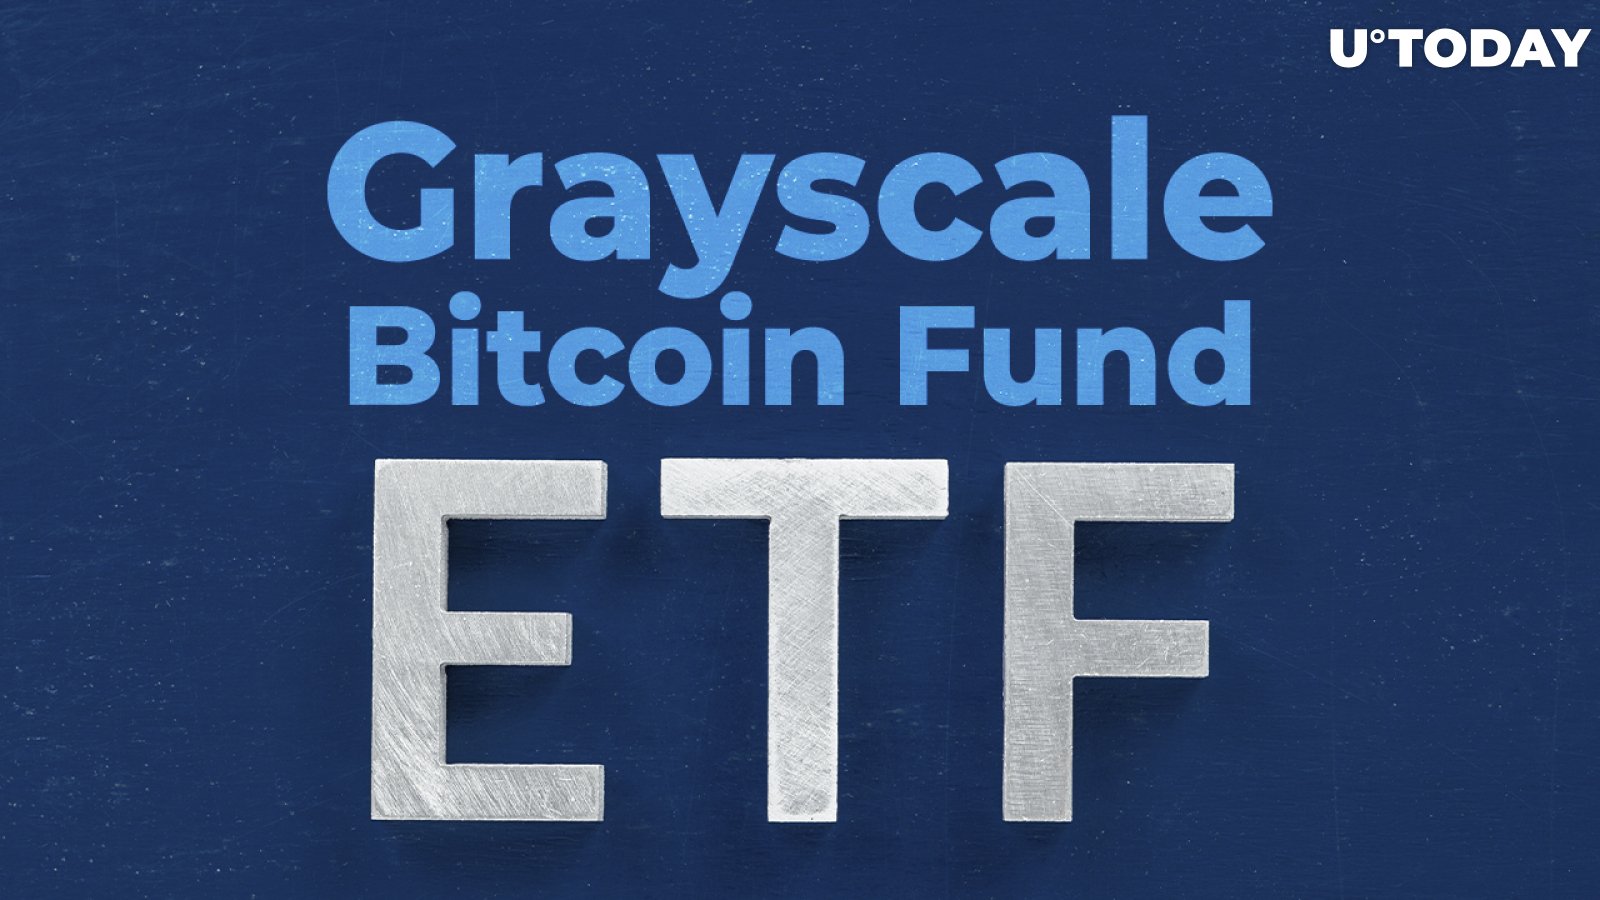 Grayscale Bitcoin Fund to Be Possibly Converted to ETF On December 24